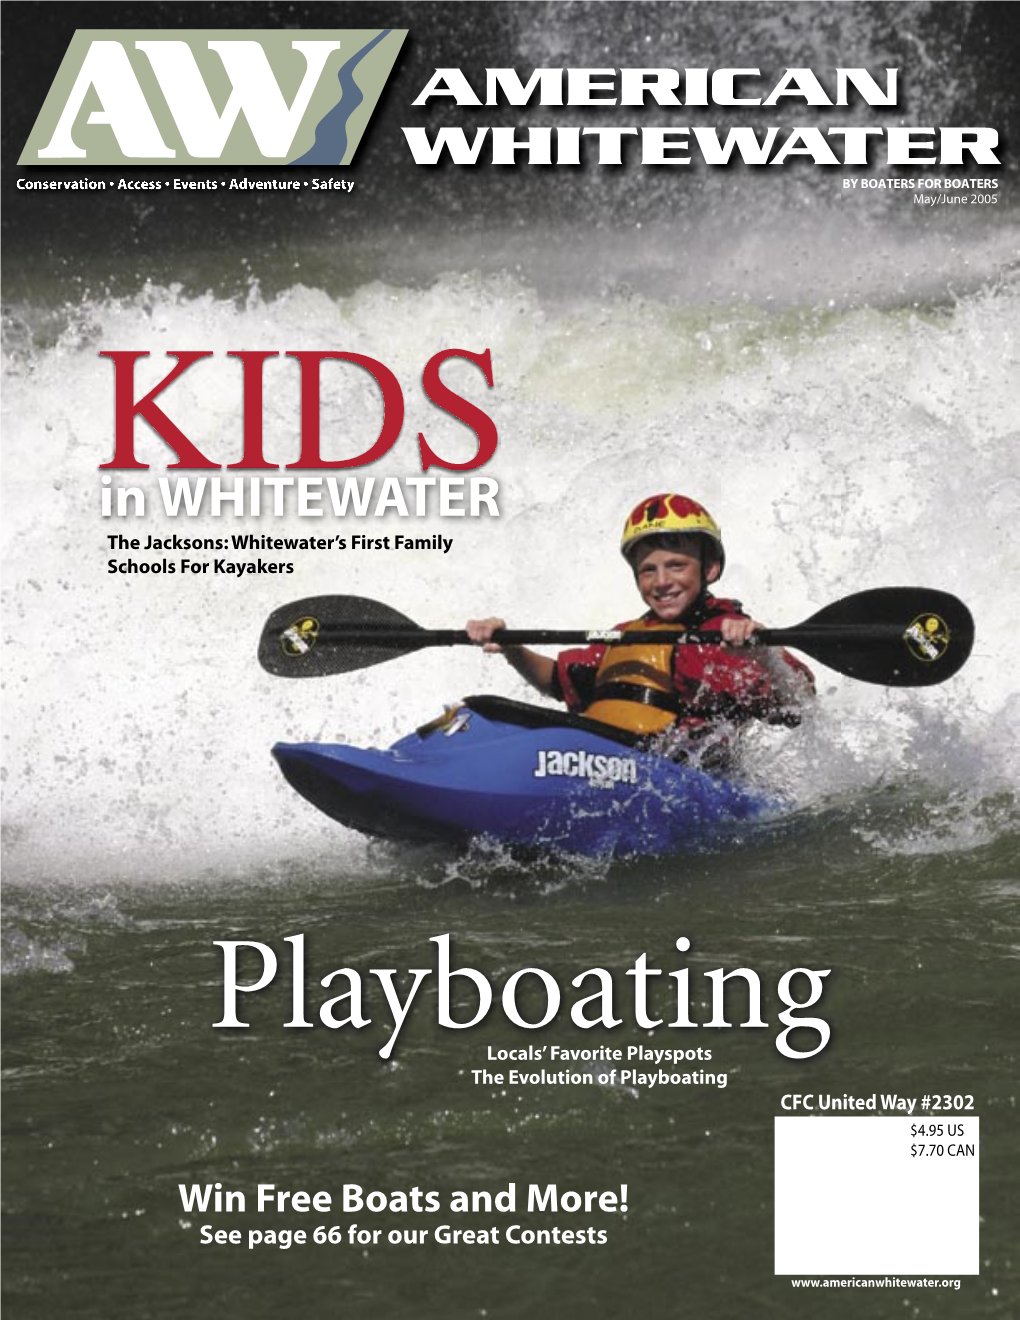 Win Free Boats and More! See Page 66 for Our Great Contests